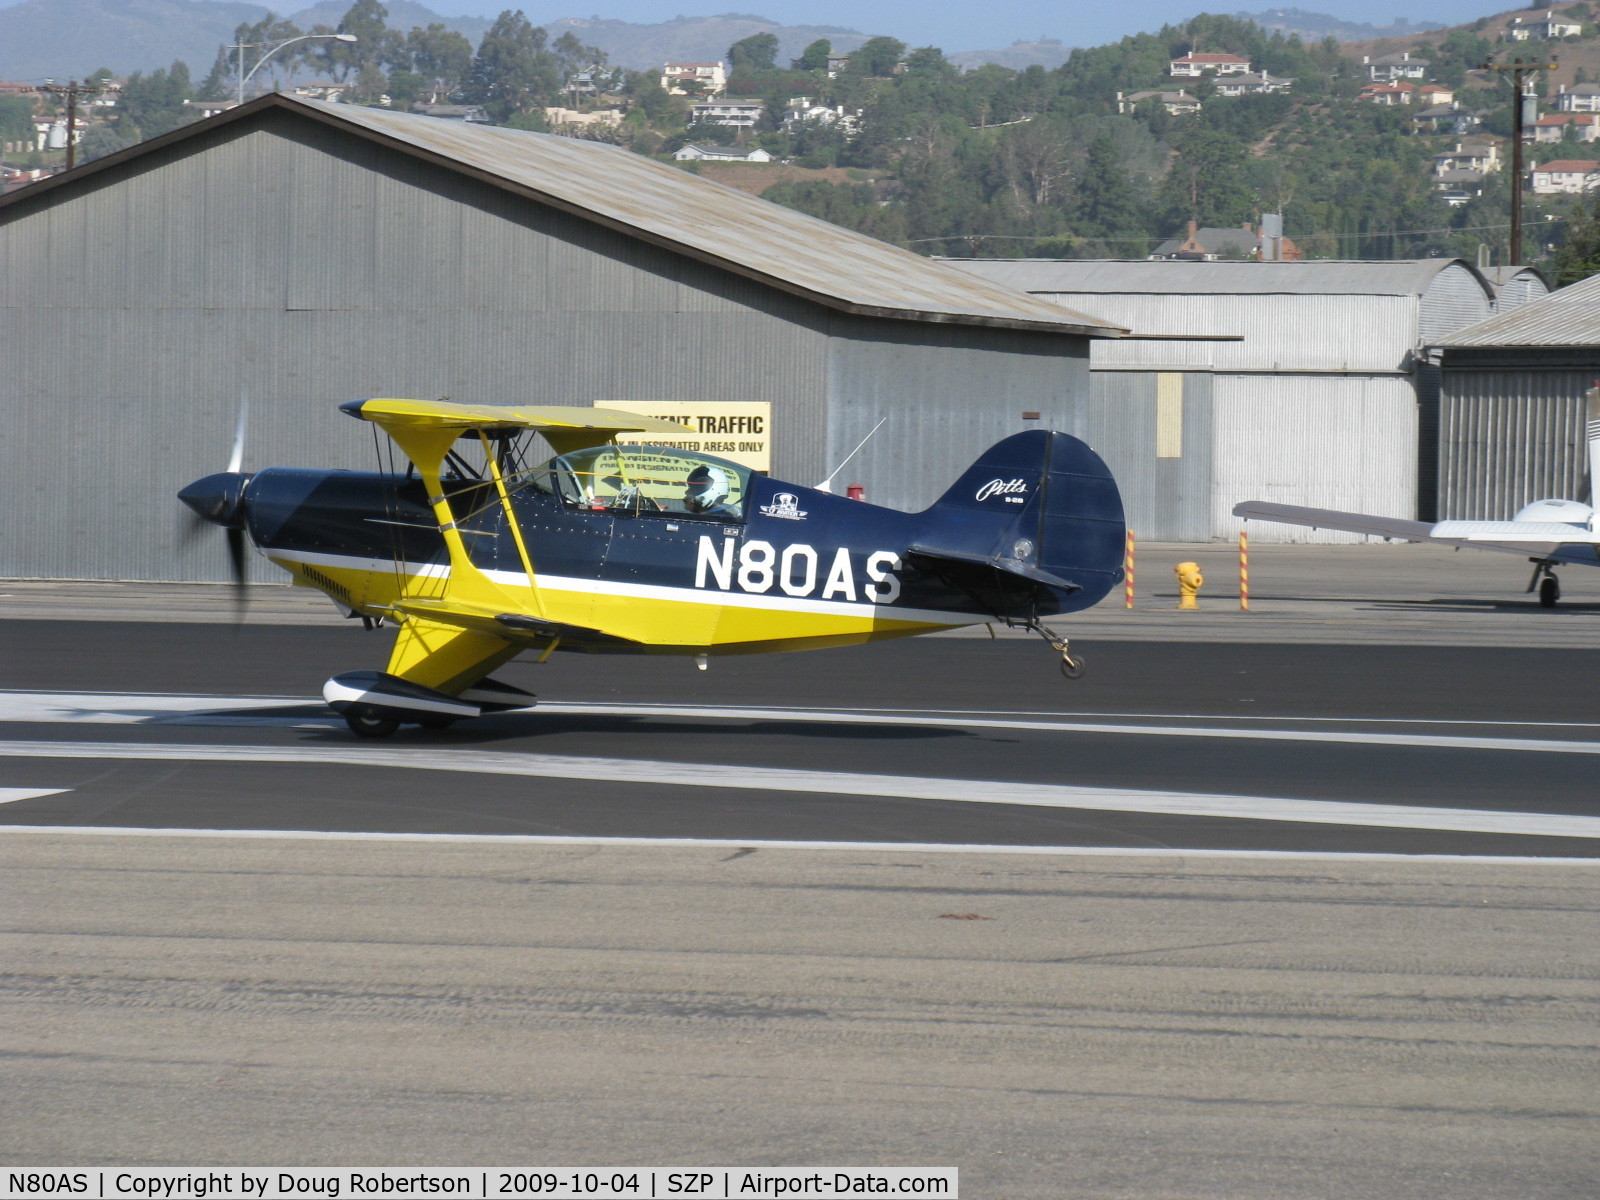 N80AS, 1992 Pitts S-2B Special C/N 5244, 1992 Pitts Aerobatics PITTS S-2B, Lycoming AEIO-540, takeoff roll Rwy 22, tail quickly up